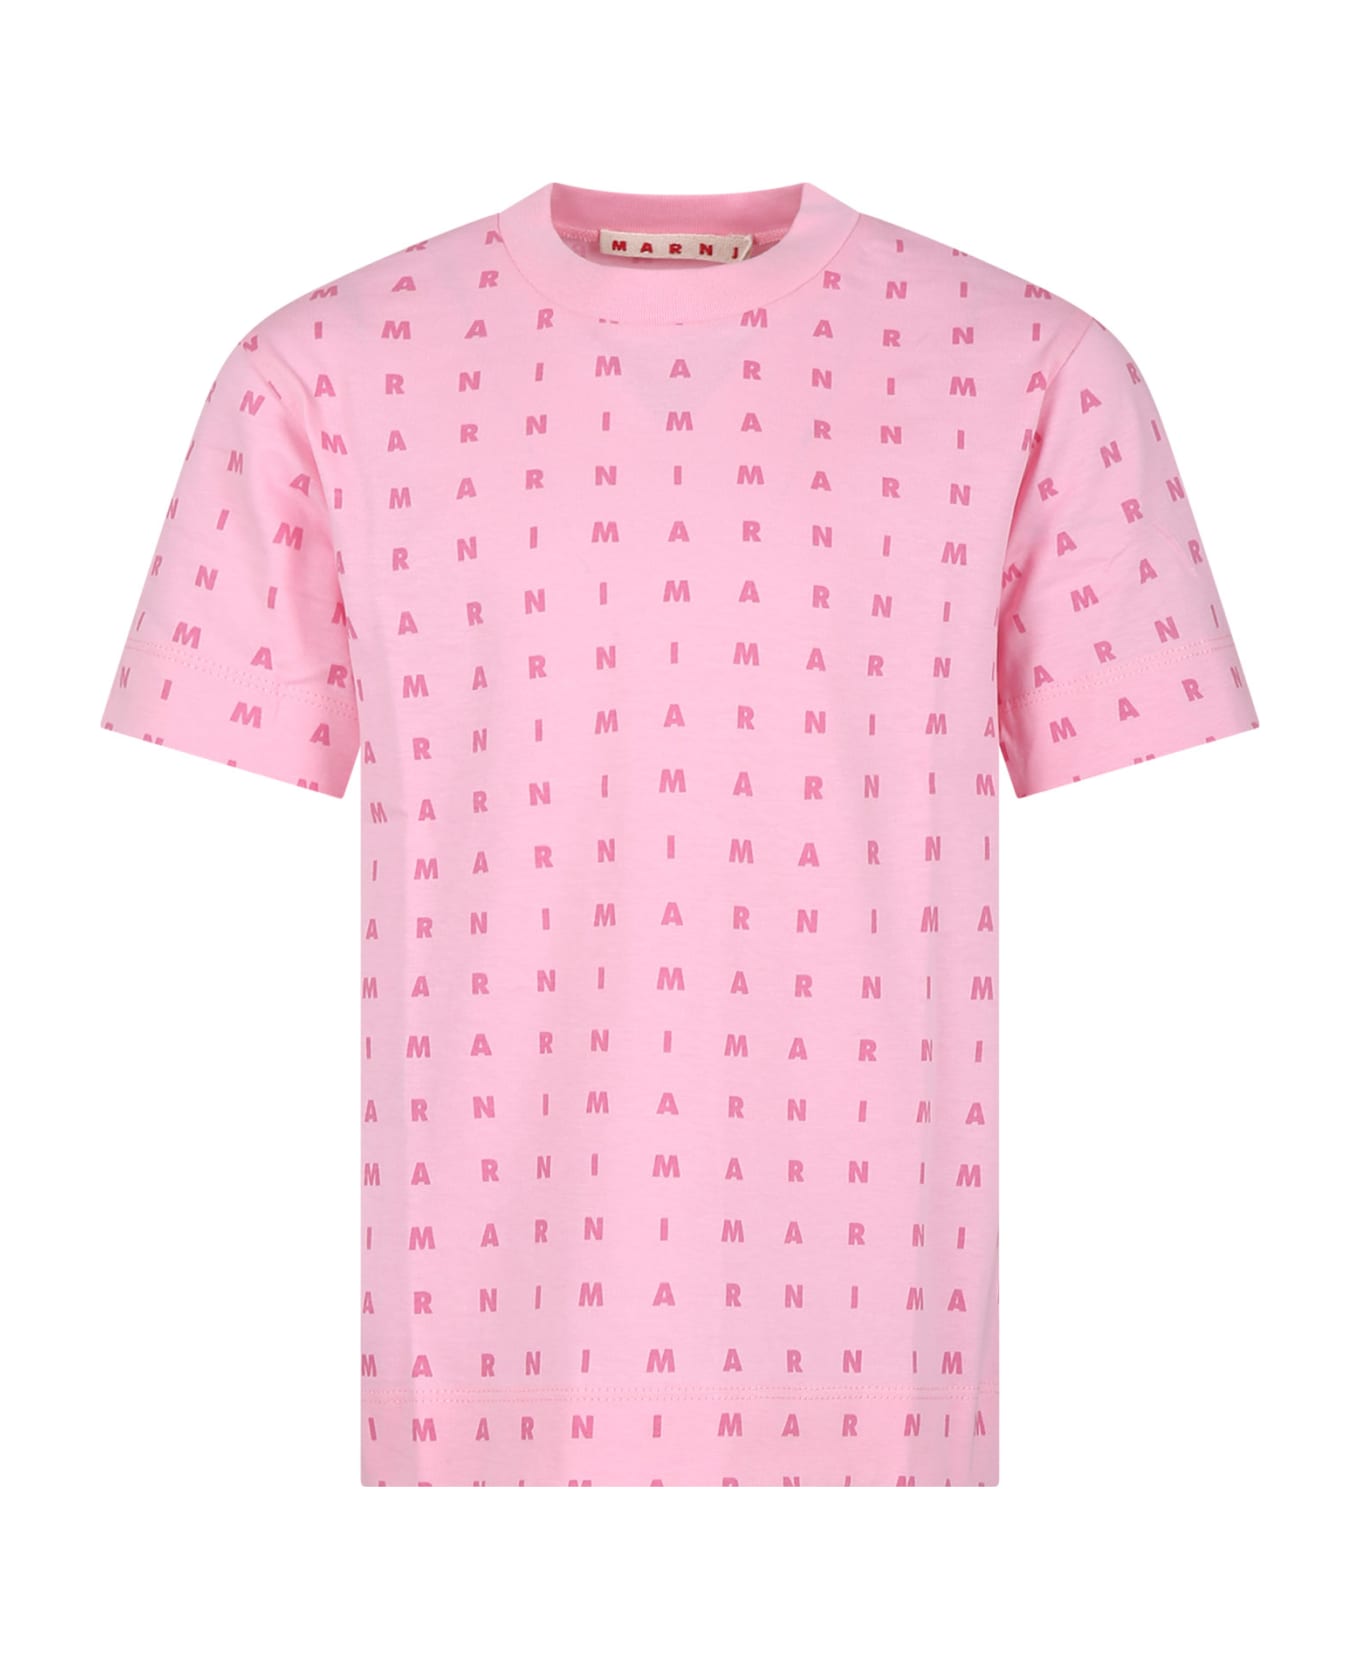 Marni Pink T-shirt For Girl With Logo - Pink